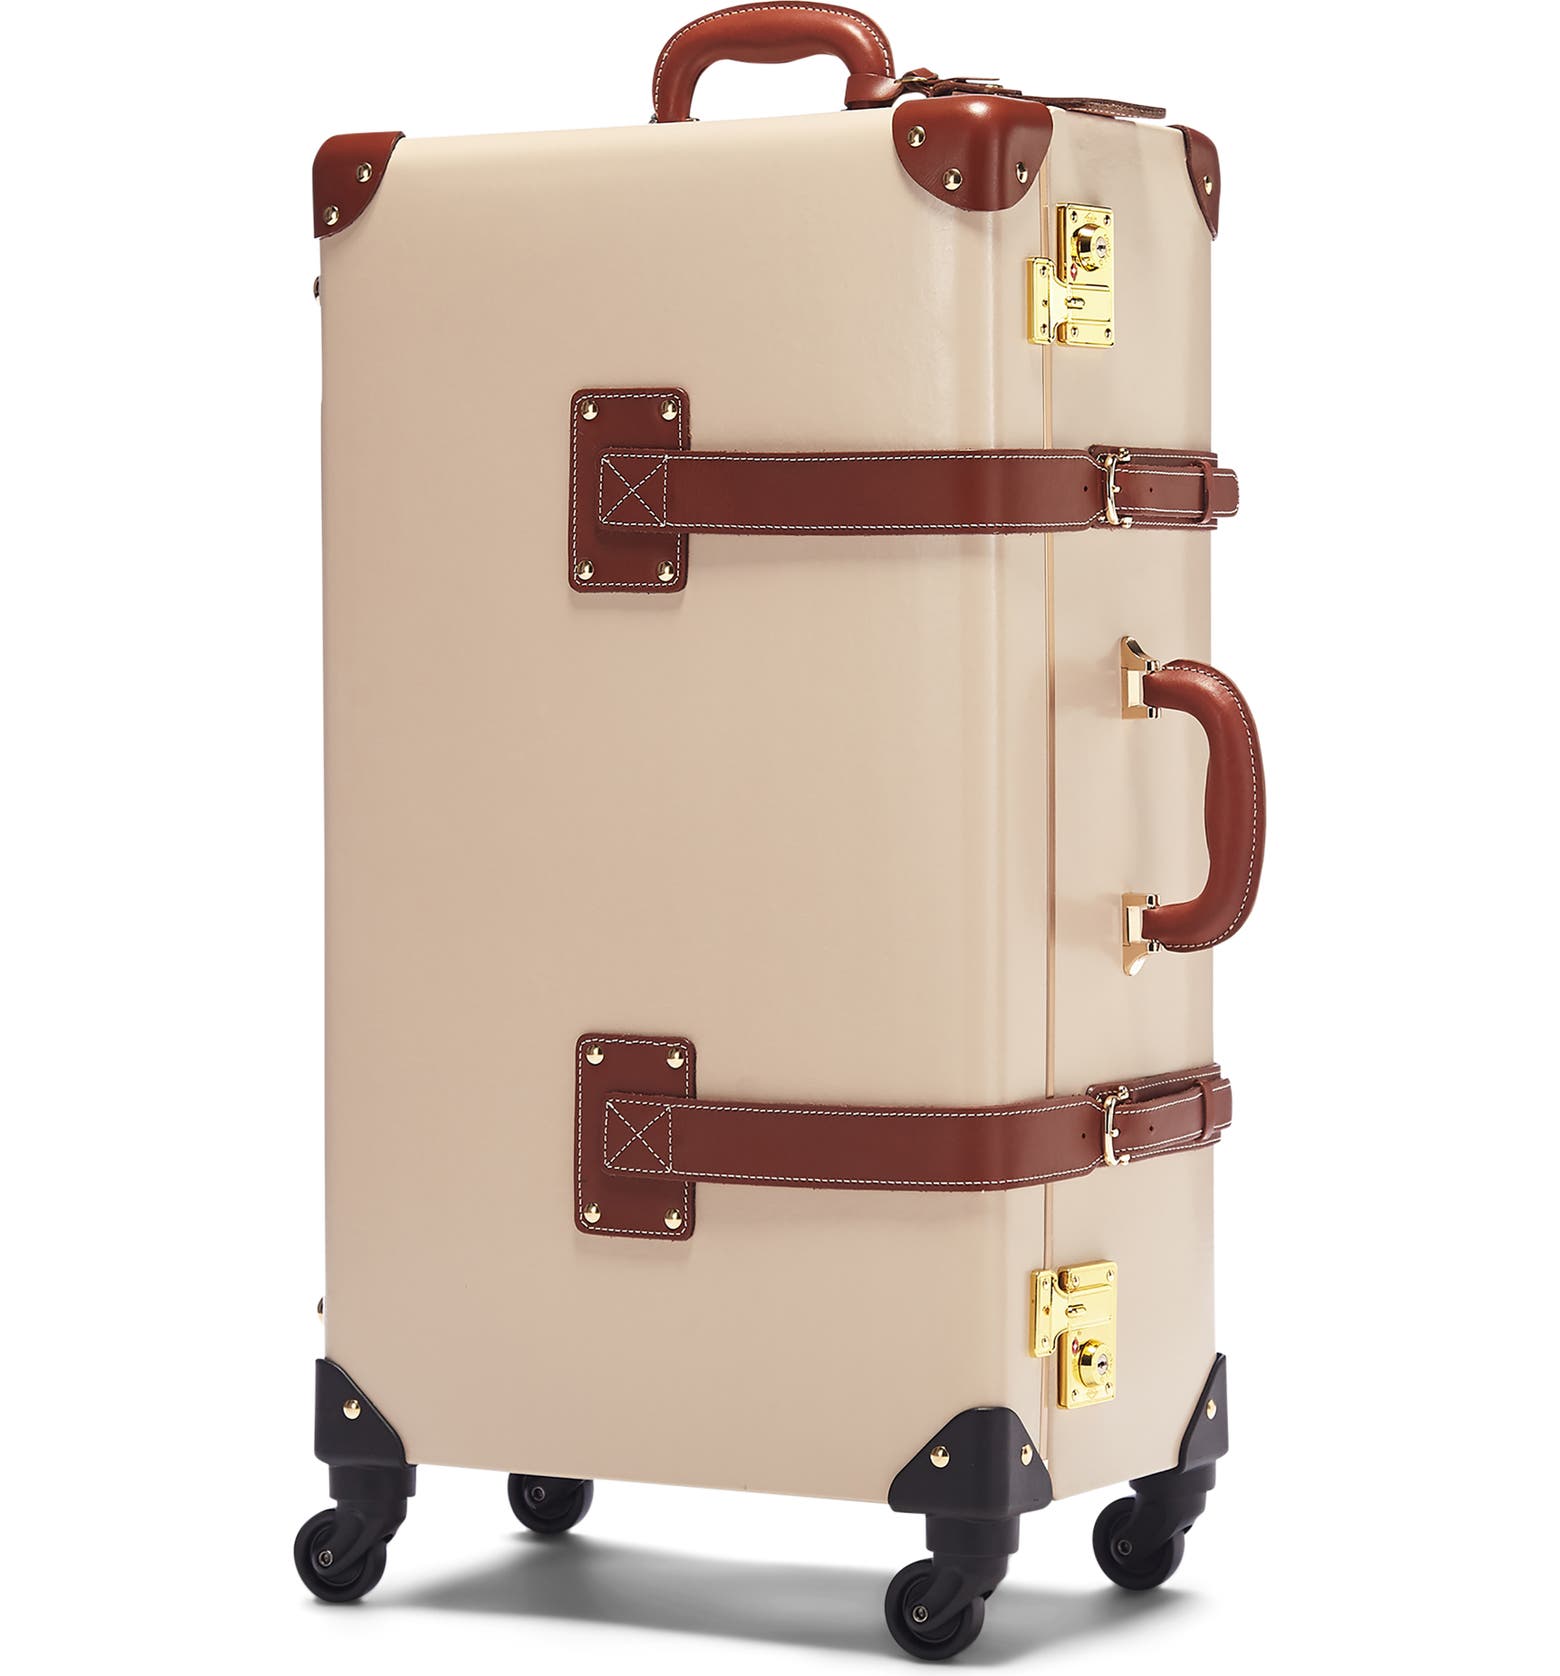 SteamLine Luggage The Diplomat 27-Inch Check-In Spinner Packing Case ...